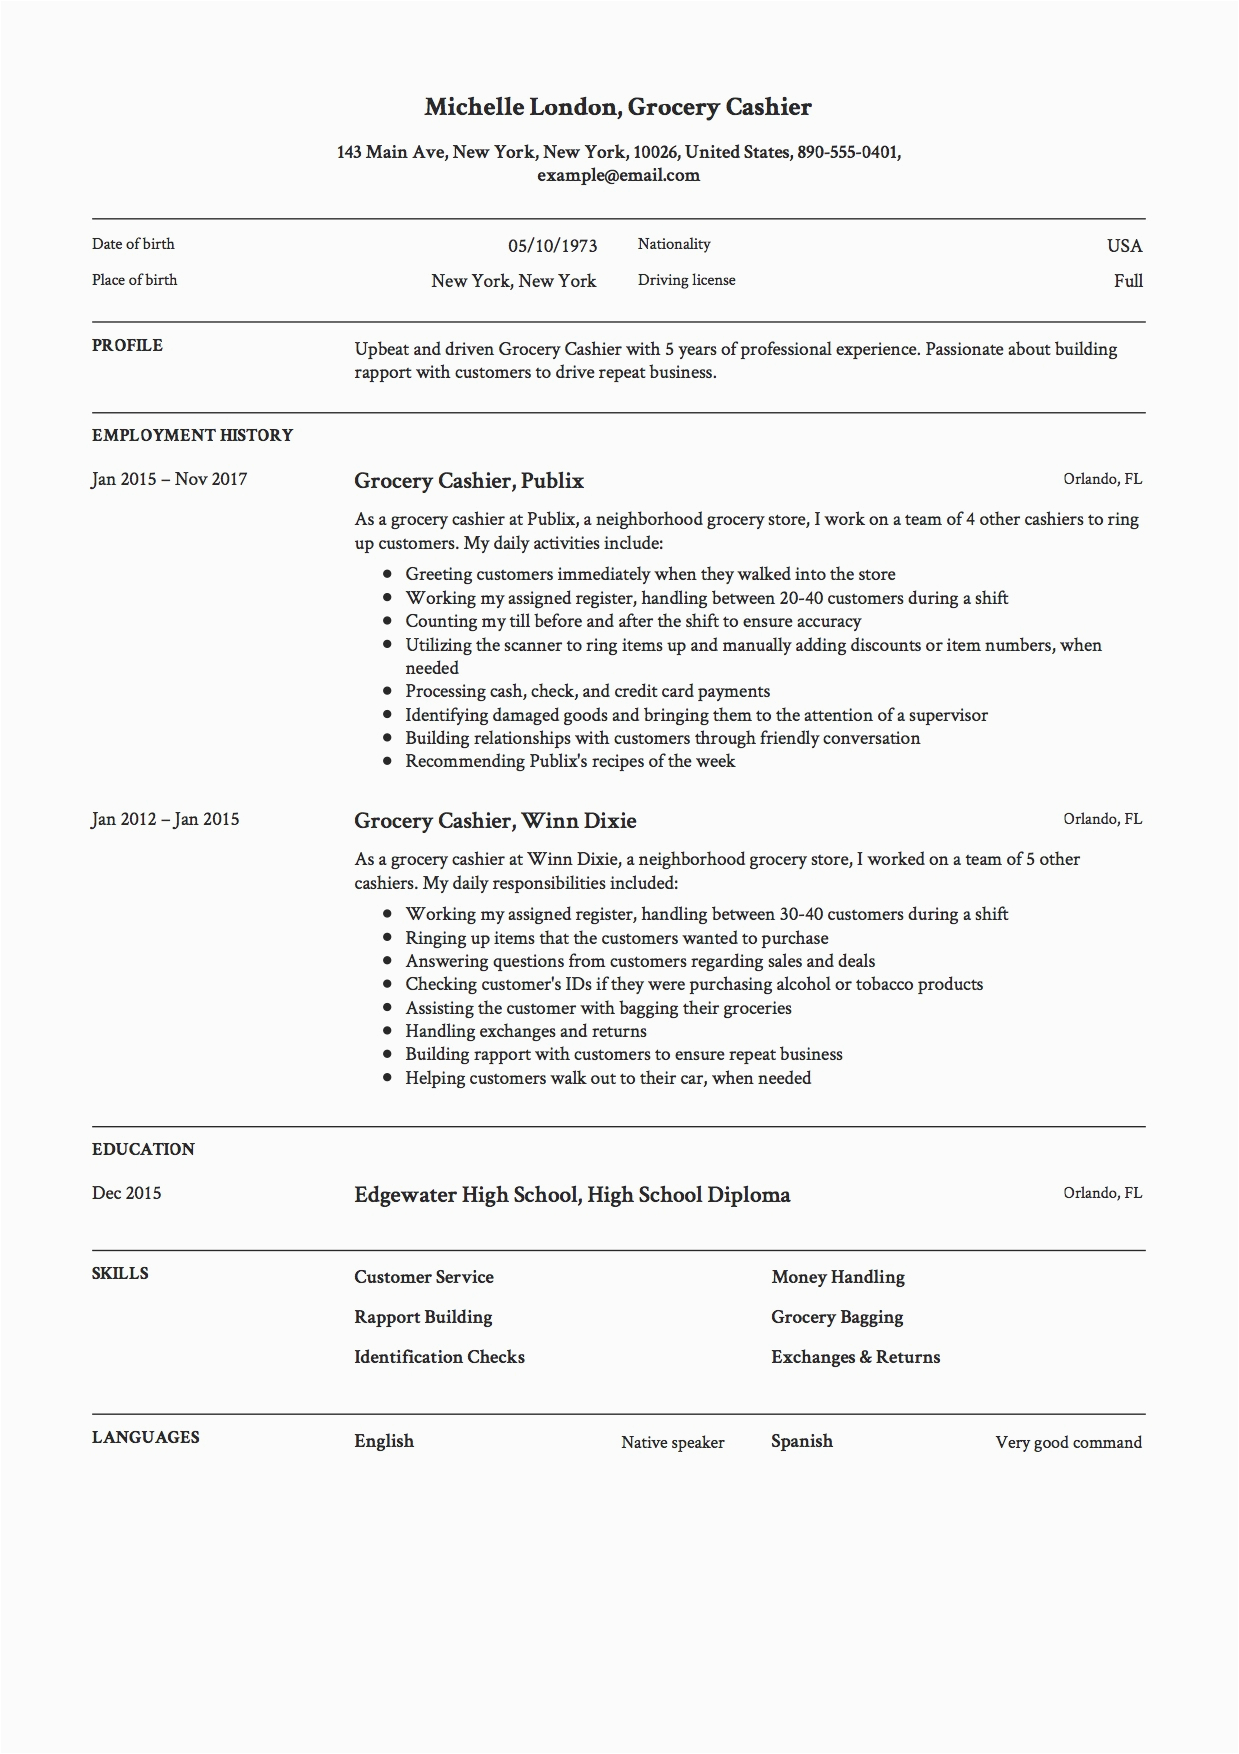 Cashier for Grocery Store Resume Sample 12 Grocery Cashier Resume Sample S 2018 Free Downloads